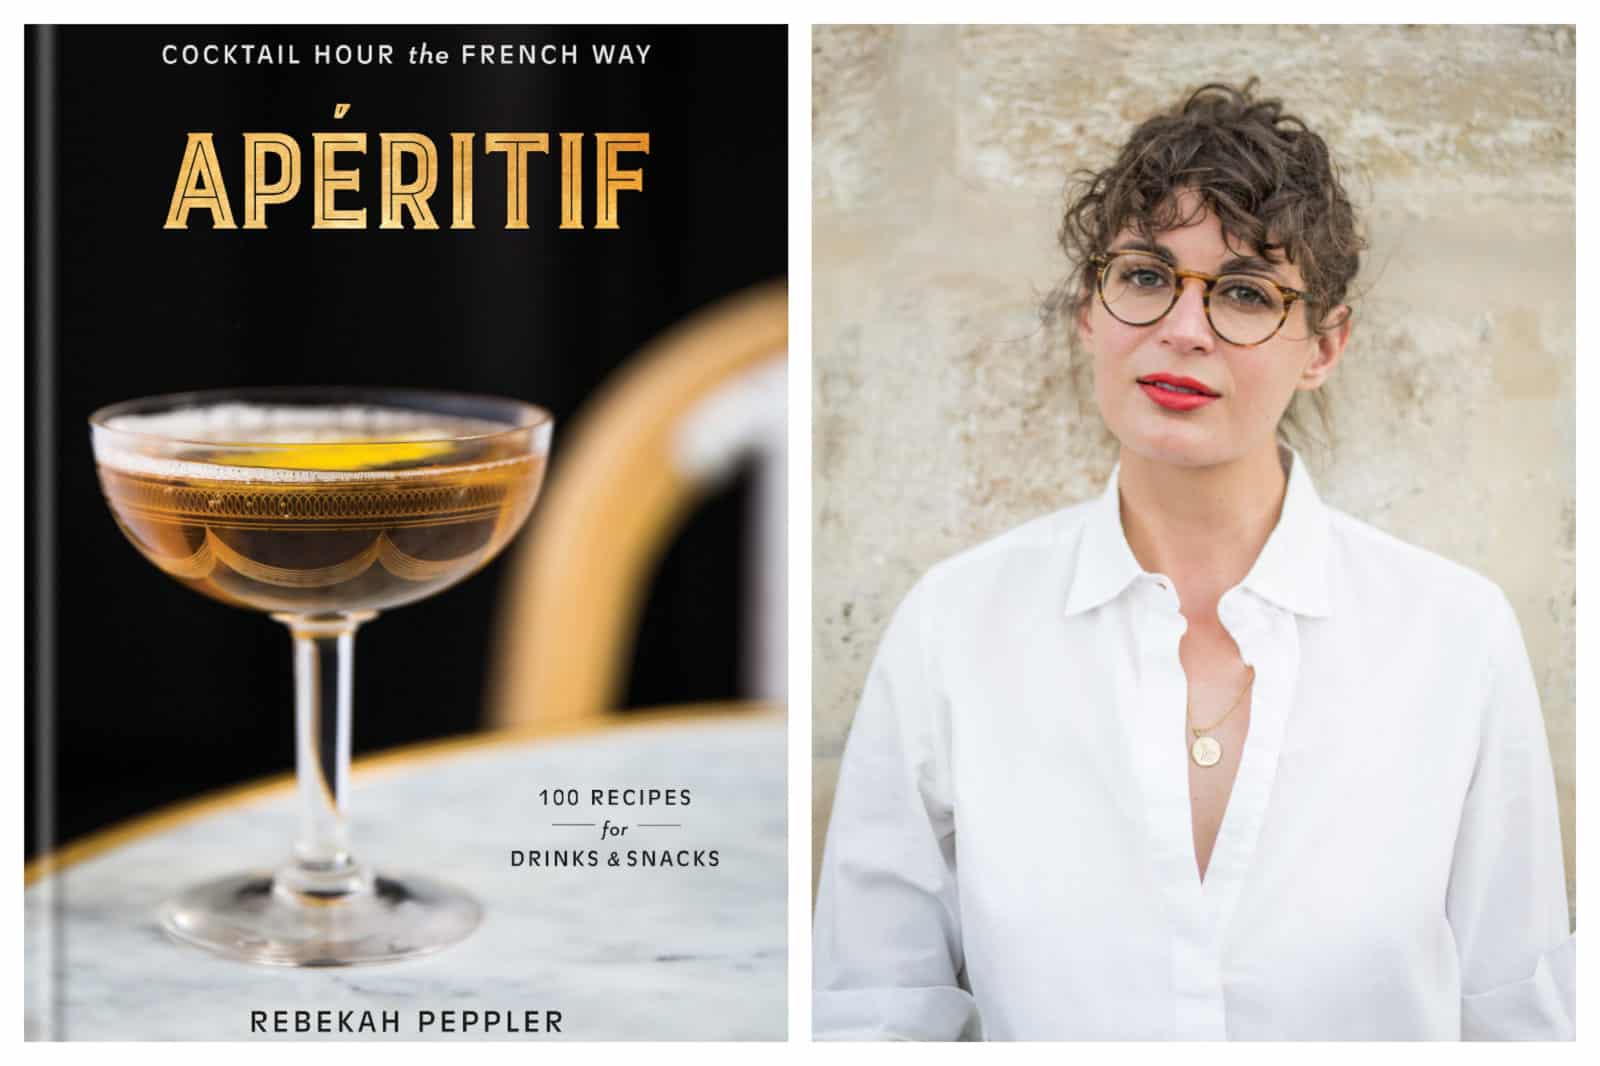 How to make cocktails the French way in author Rebekah Peppler's 'Aperitif' Book